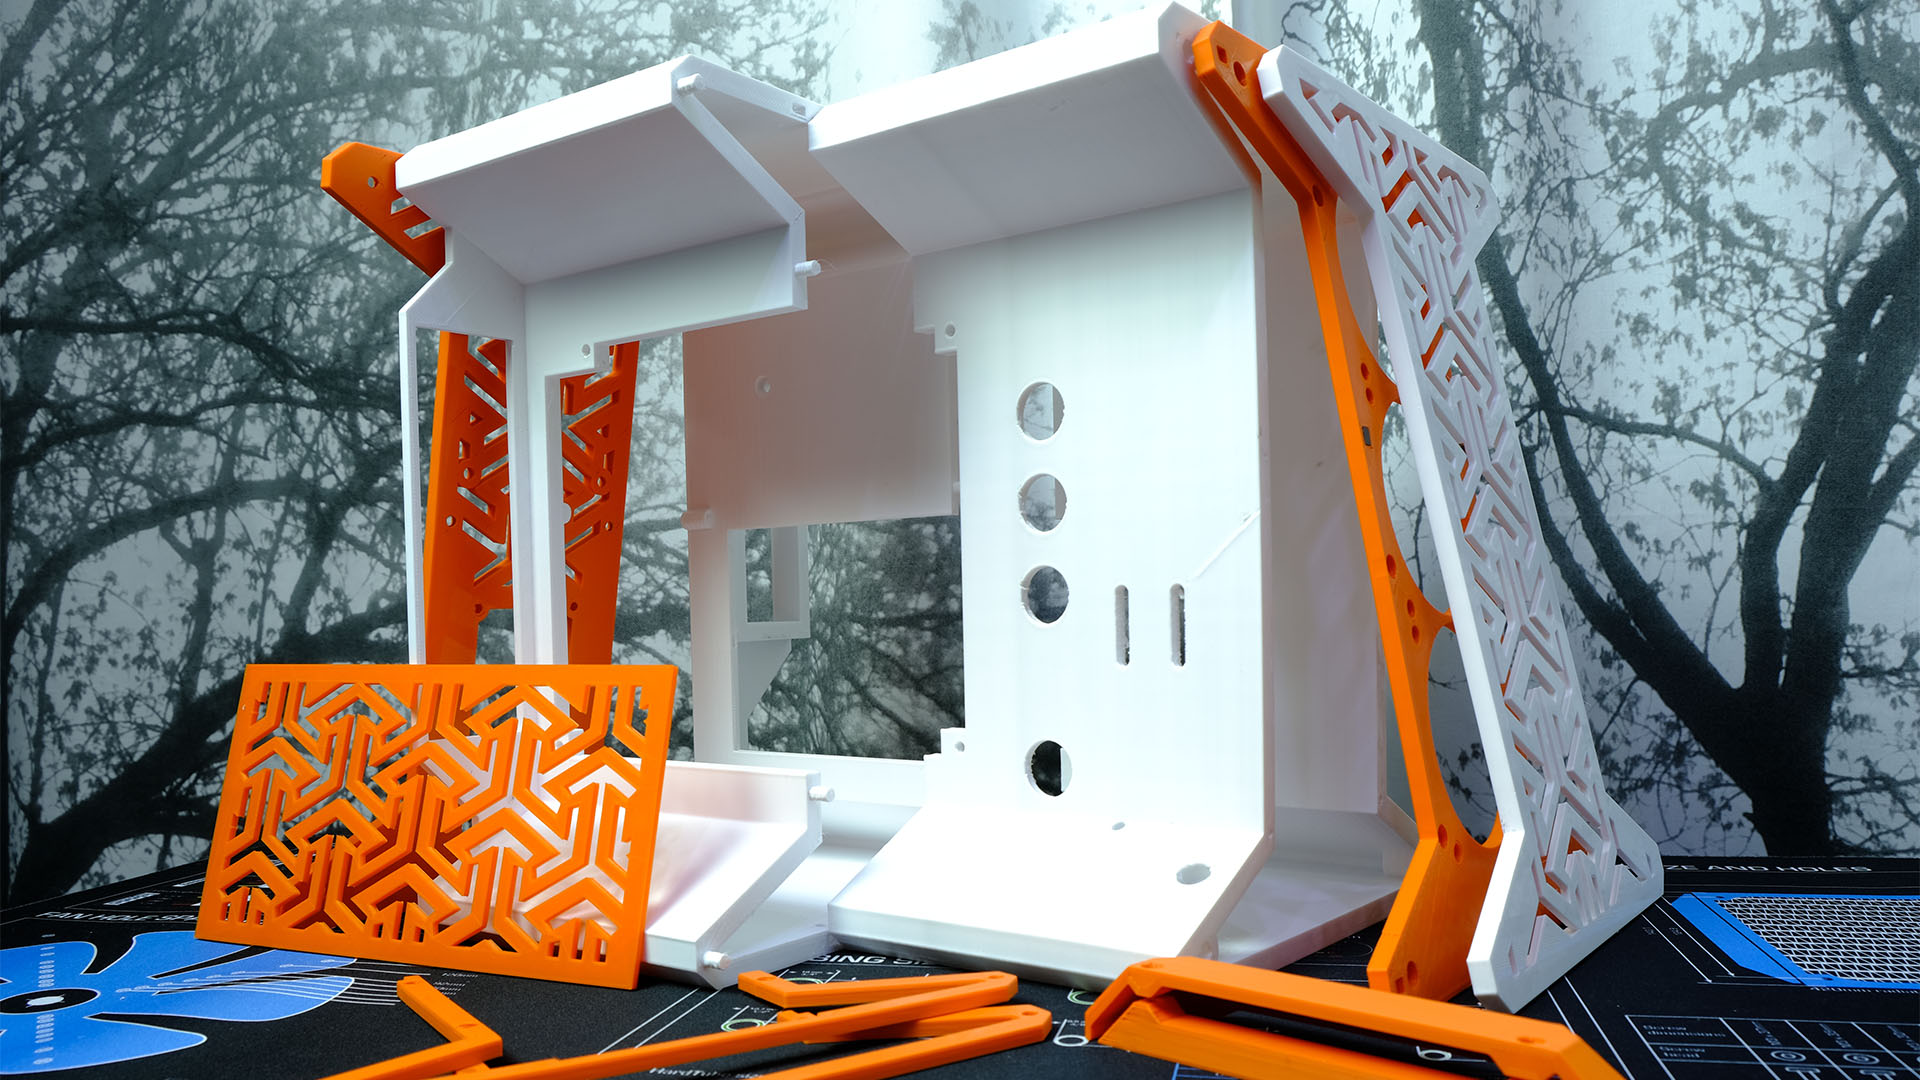 All of the 3D printed parts for the white and orange PC case